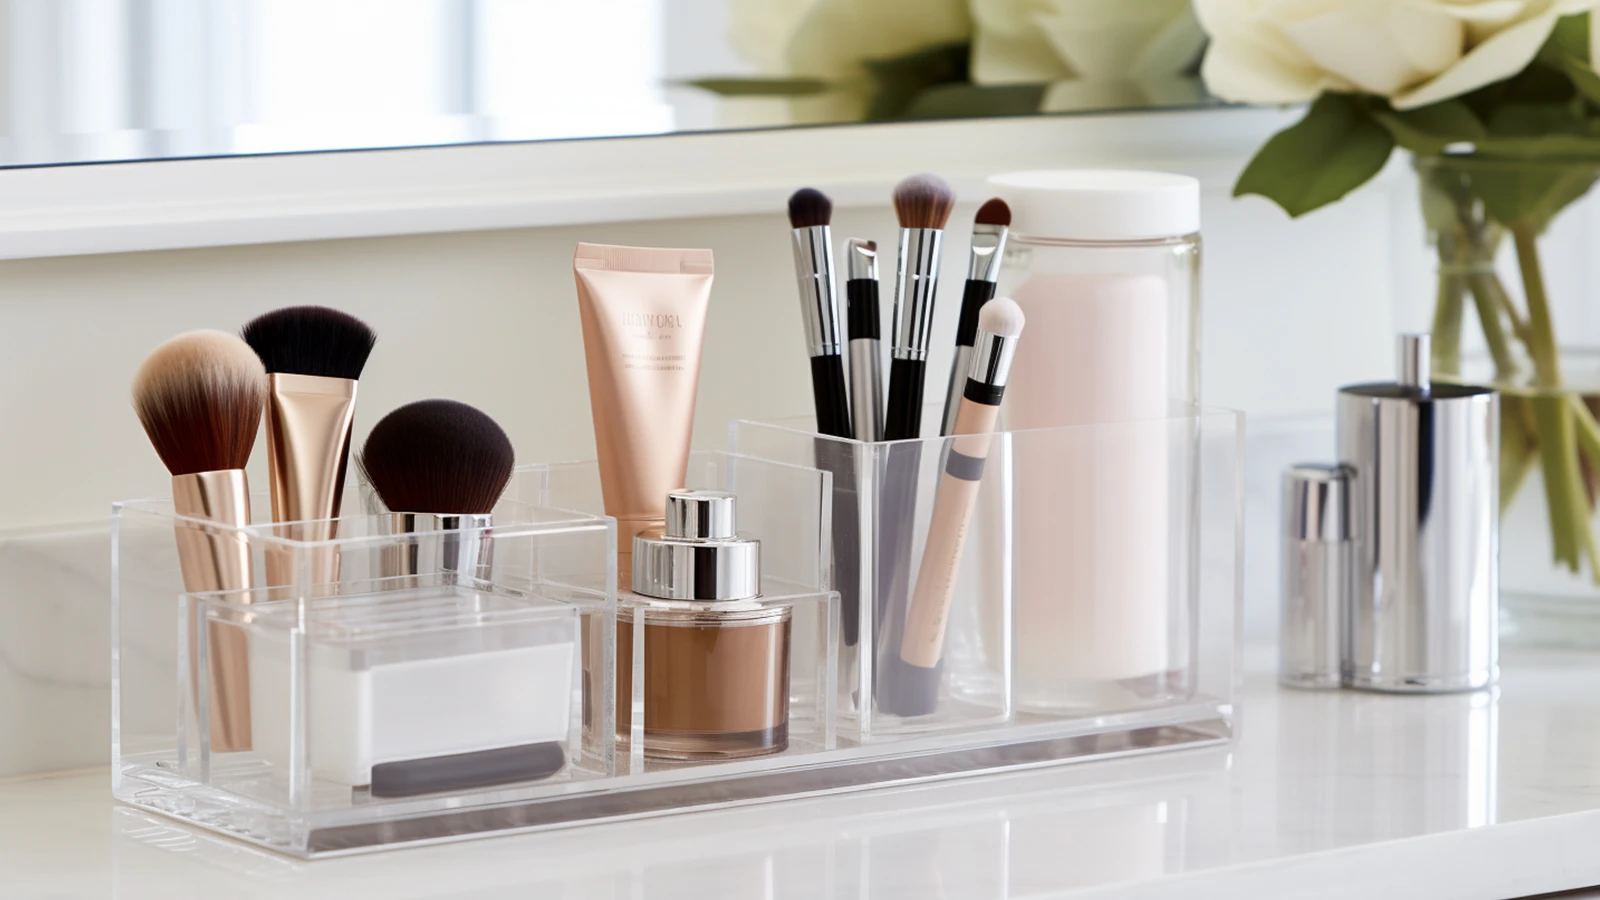 Small bathroom counter decorating ideas: a vanity with makeup brushes and a vase on the counter.